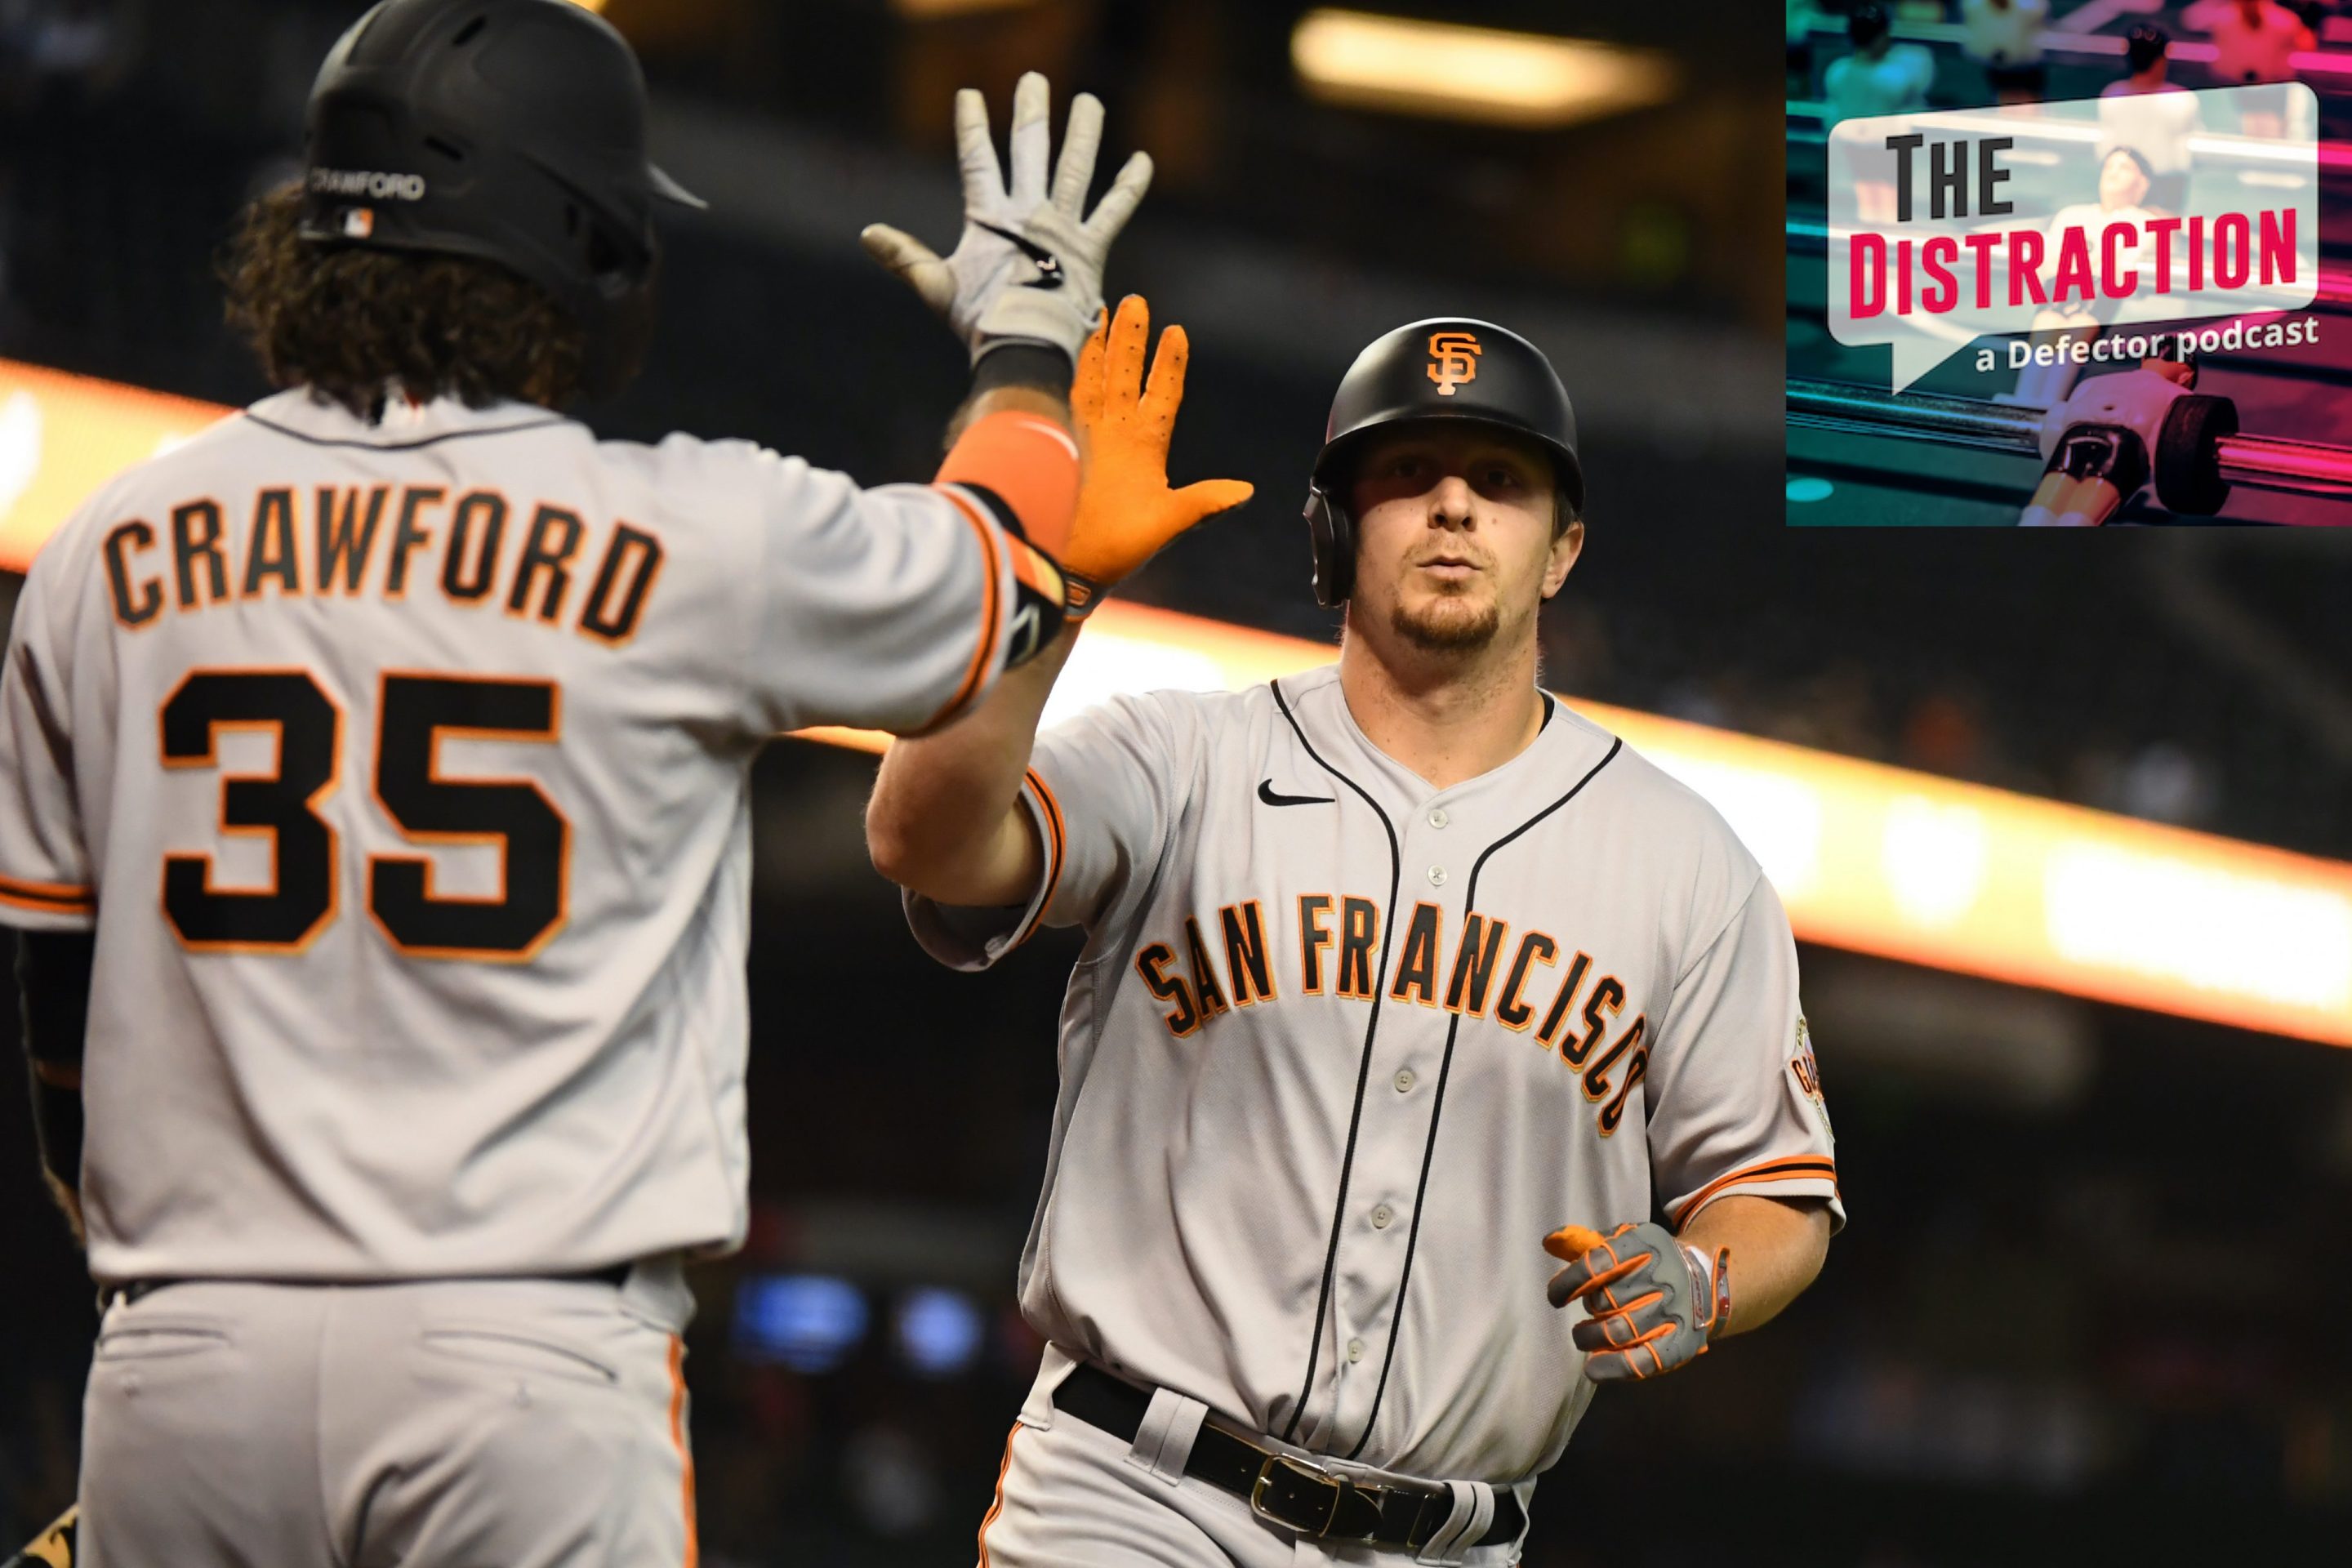 Alex Dickerson and Brandon Crawford congratulate each other at home plate, presumably for being talked about on this episode of The Distraction.